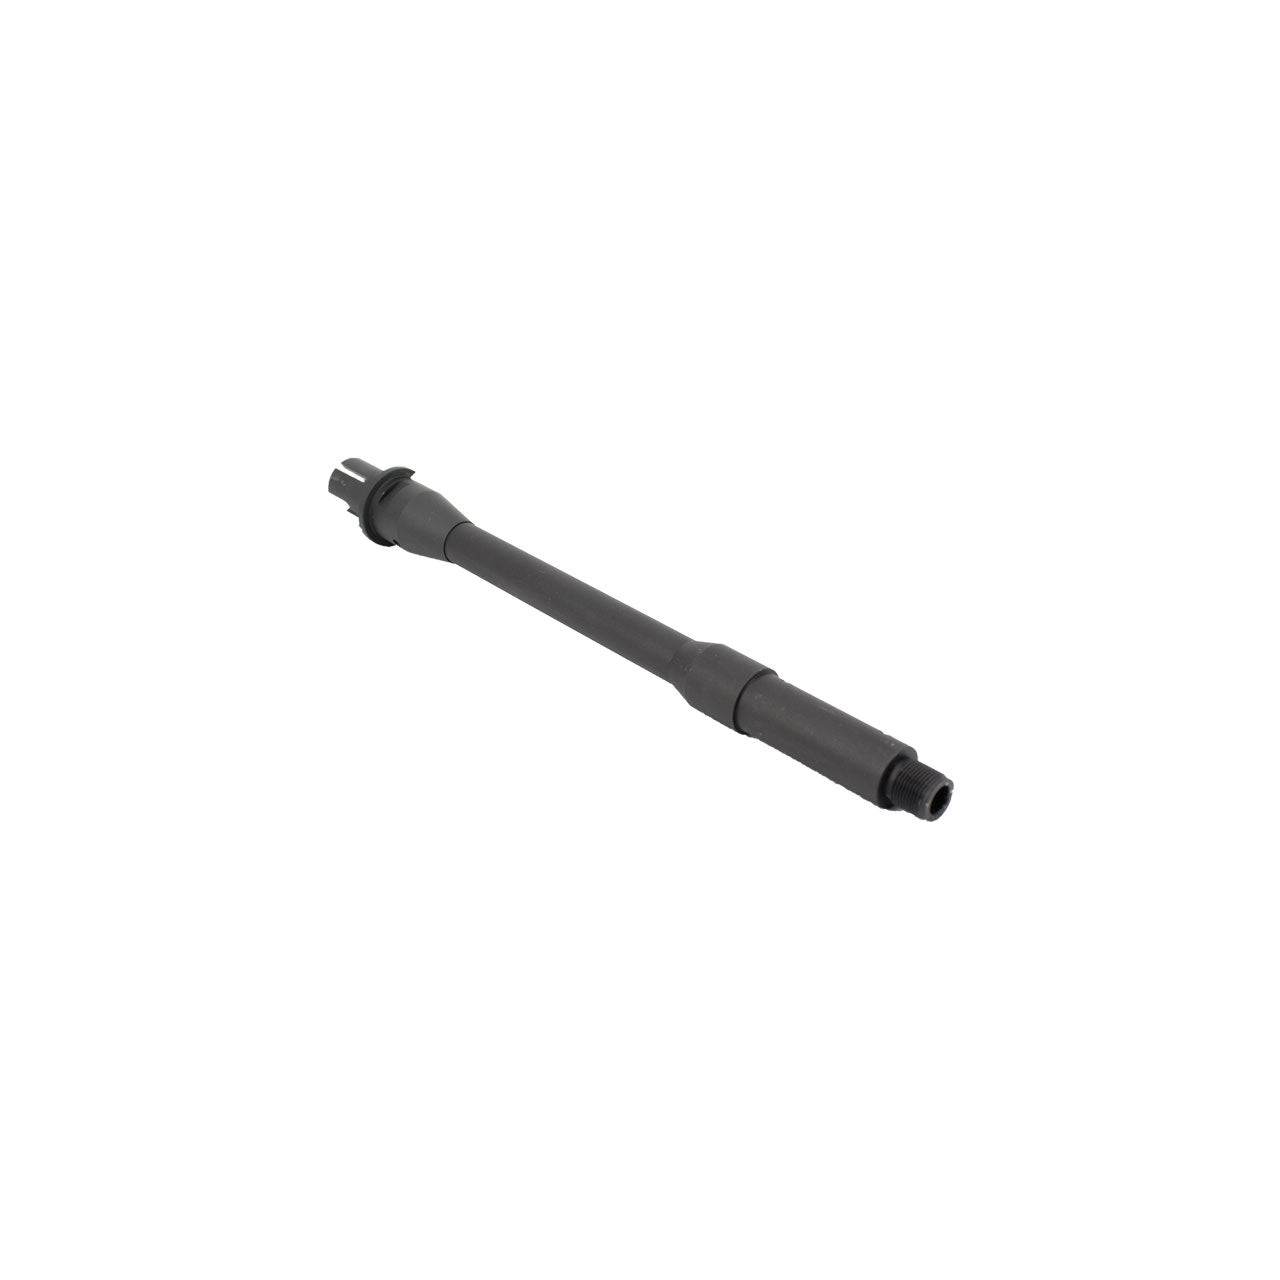 5KU Full Metal Outer Barrel for M4/M16 Series Airsoft AEGs